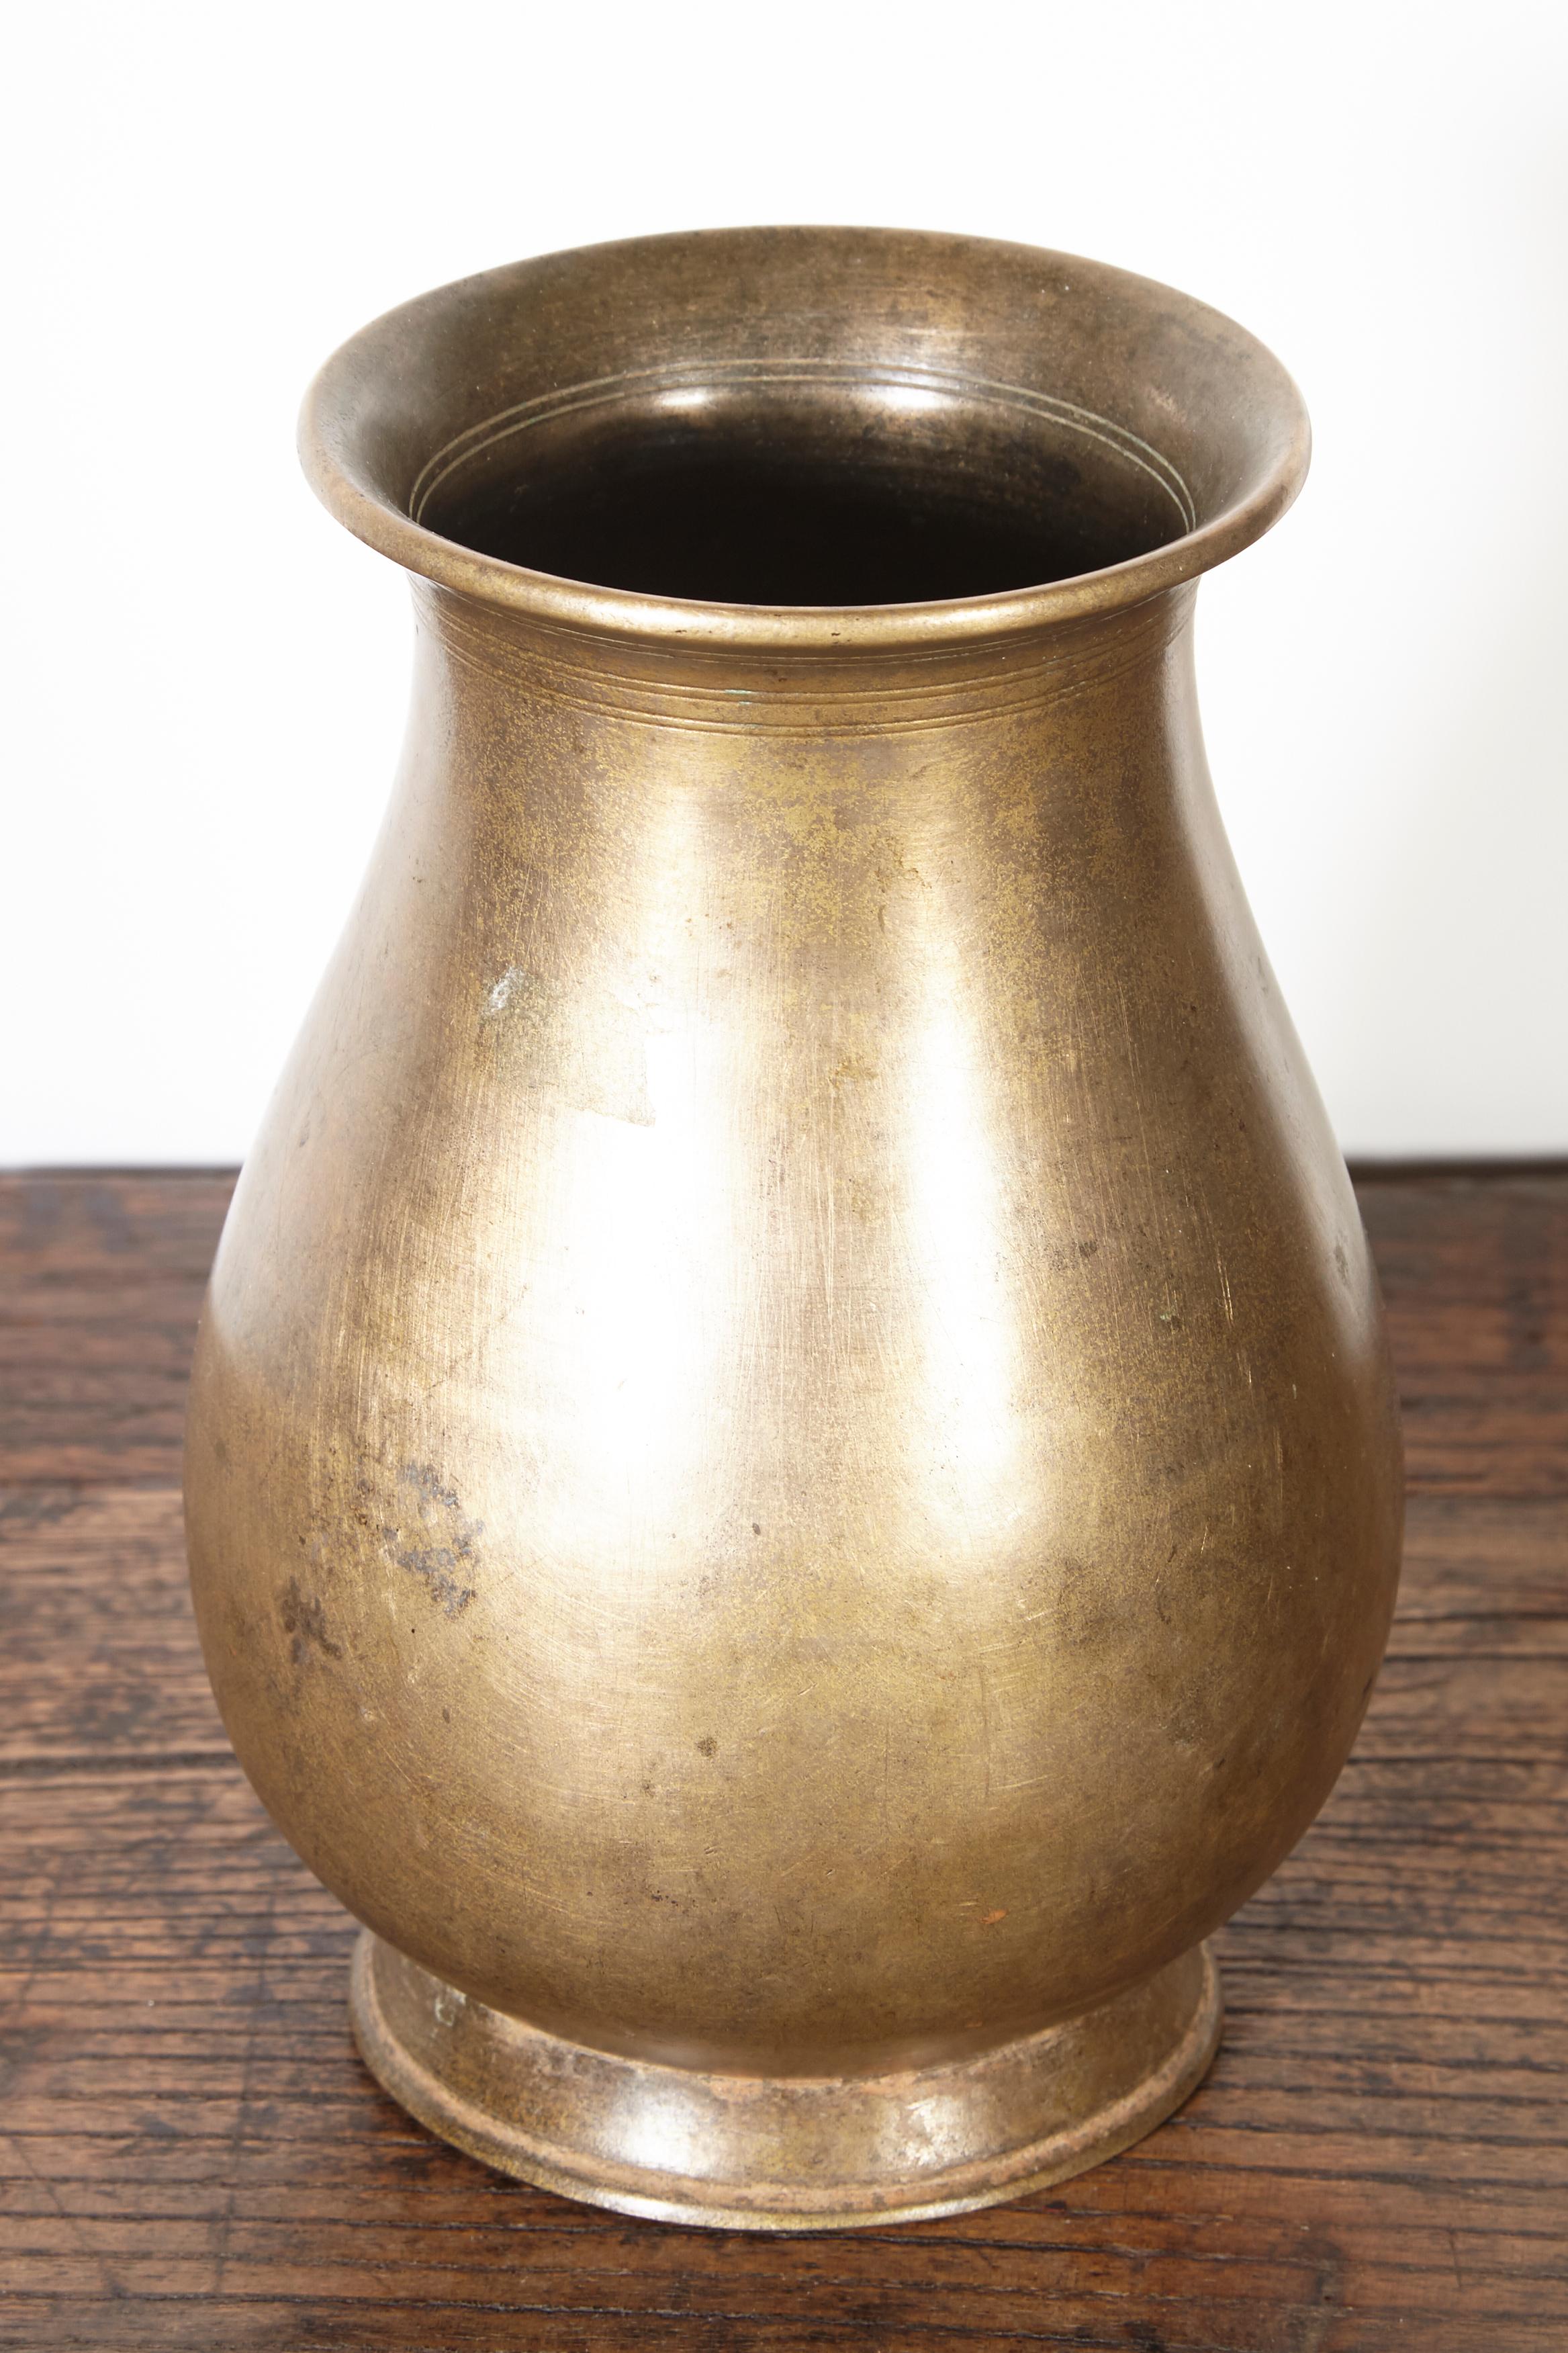 A tall and very graceful bronze ceremonial holy water vessel from Nepal, with great patina and spiritual presence.
M2033.